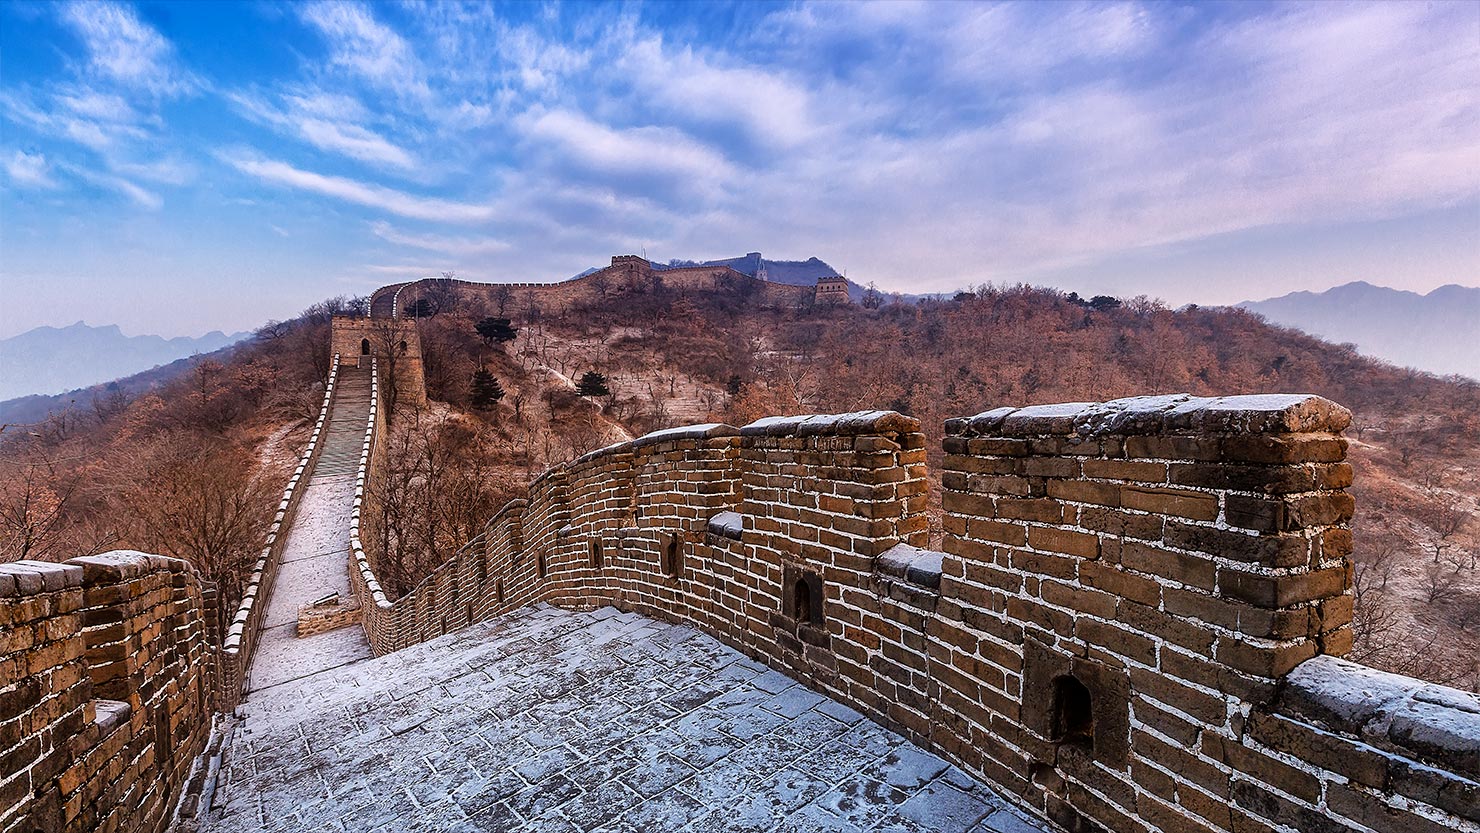 Mutianyu Great Wall Helicopter Tour - Beijing, China - Klook